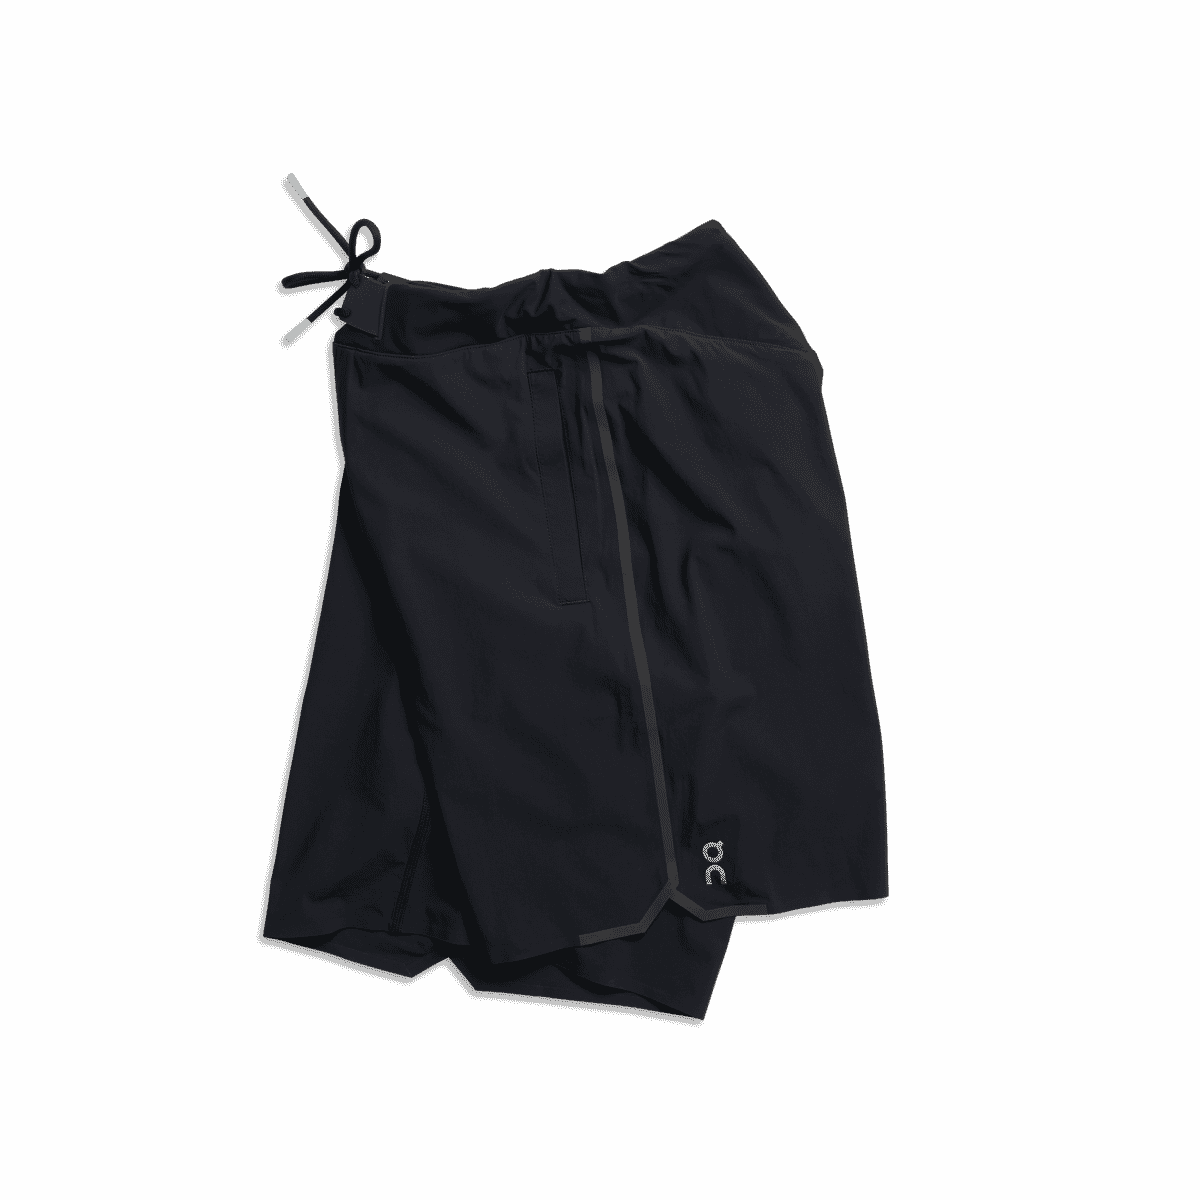 Hybrid Shorts - Combined running shorts & tights | On